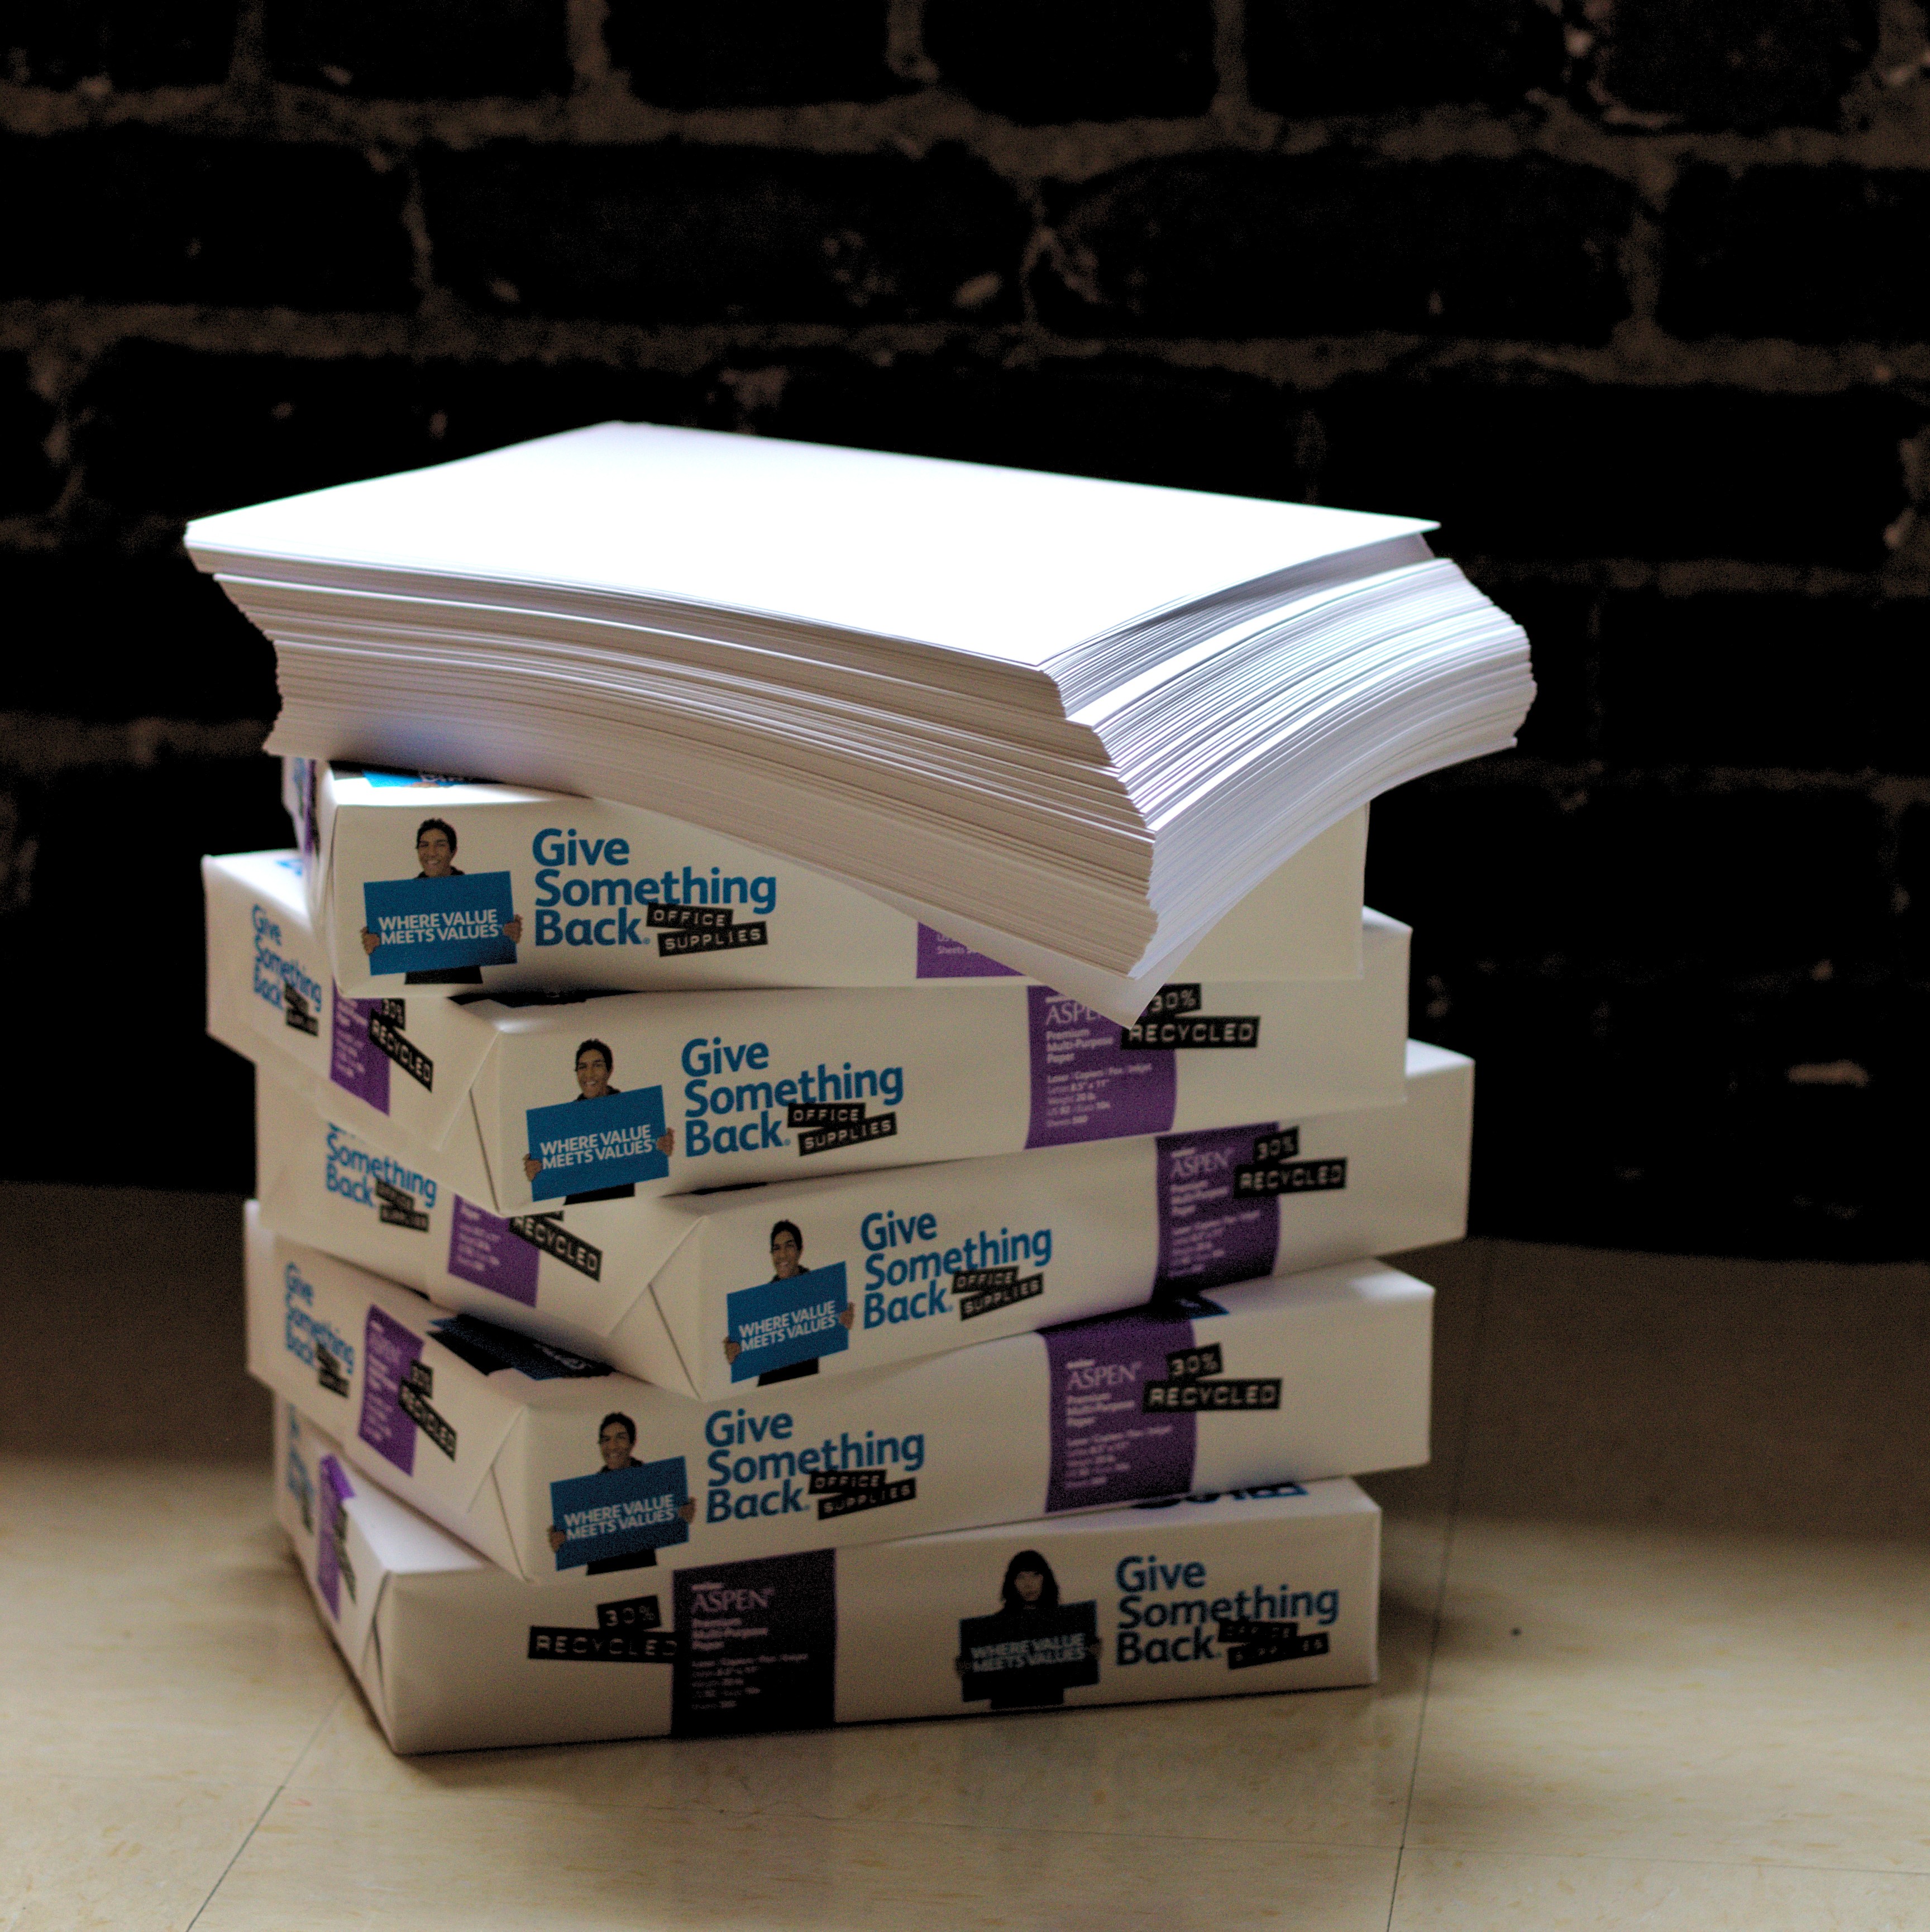 File:6 reams of paper stacked on the floor.jpg - Wikimedia Commons